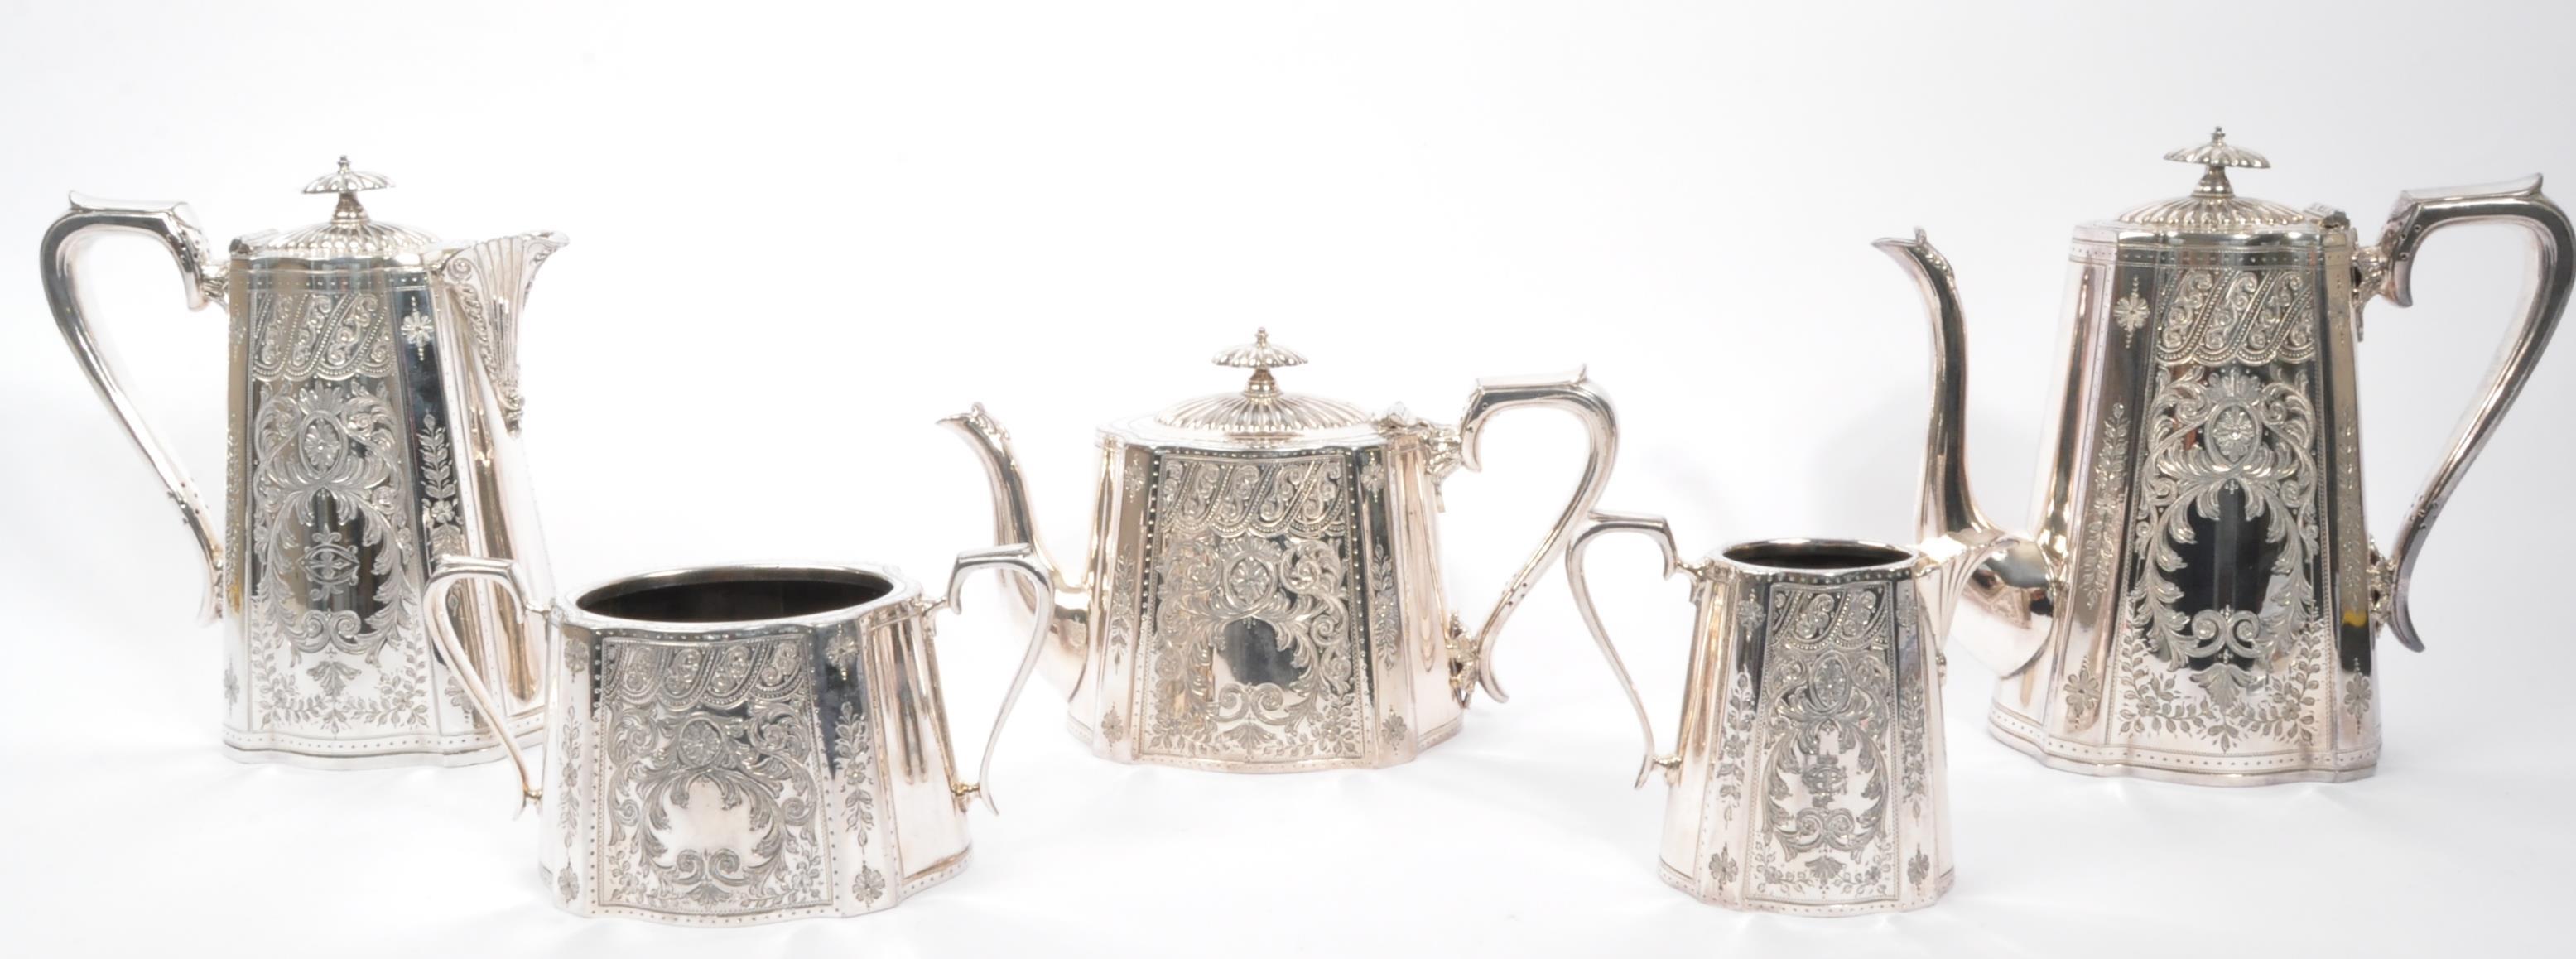 EARLY 20TH CENTURY WALKER & HALL, SHEFFIELD SILVER PLATED ITEMS